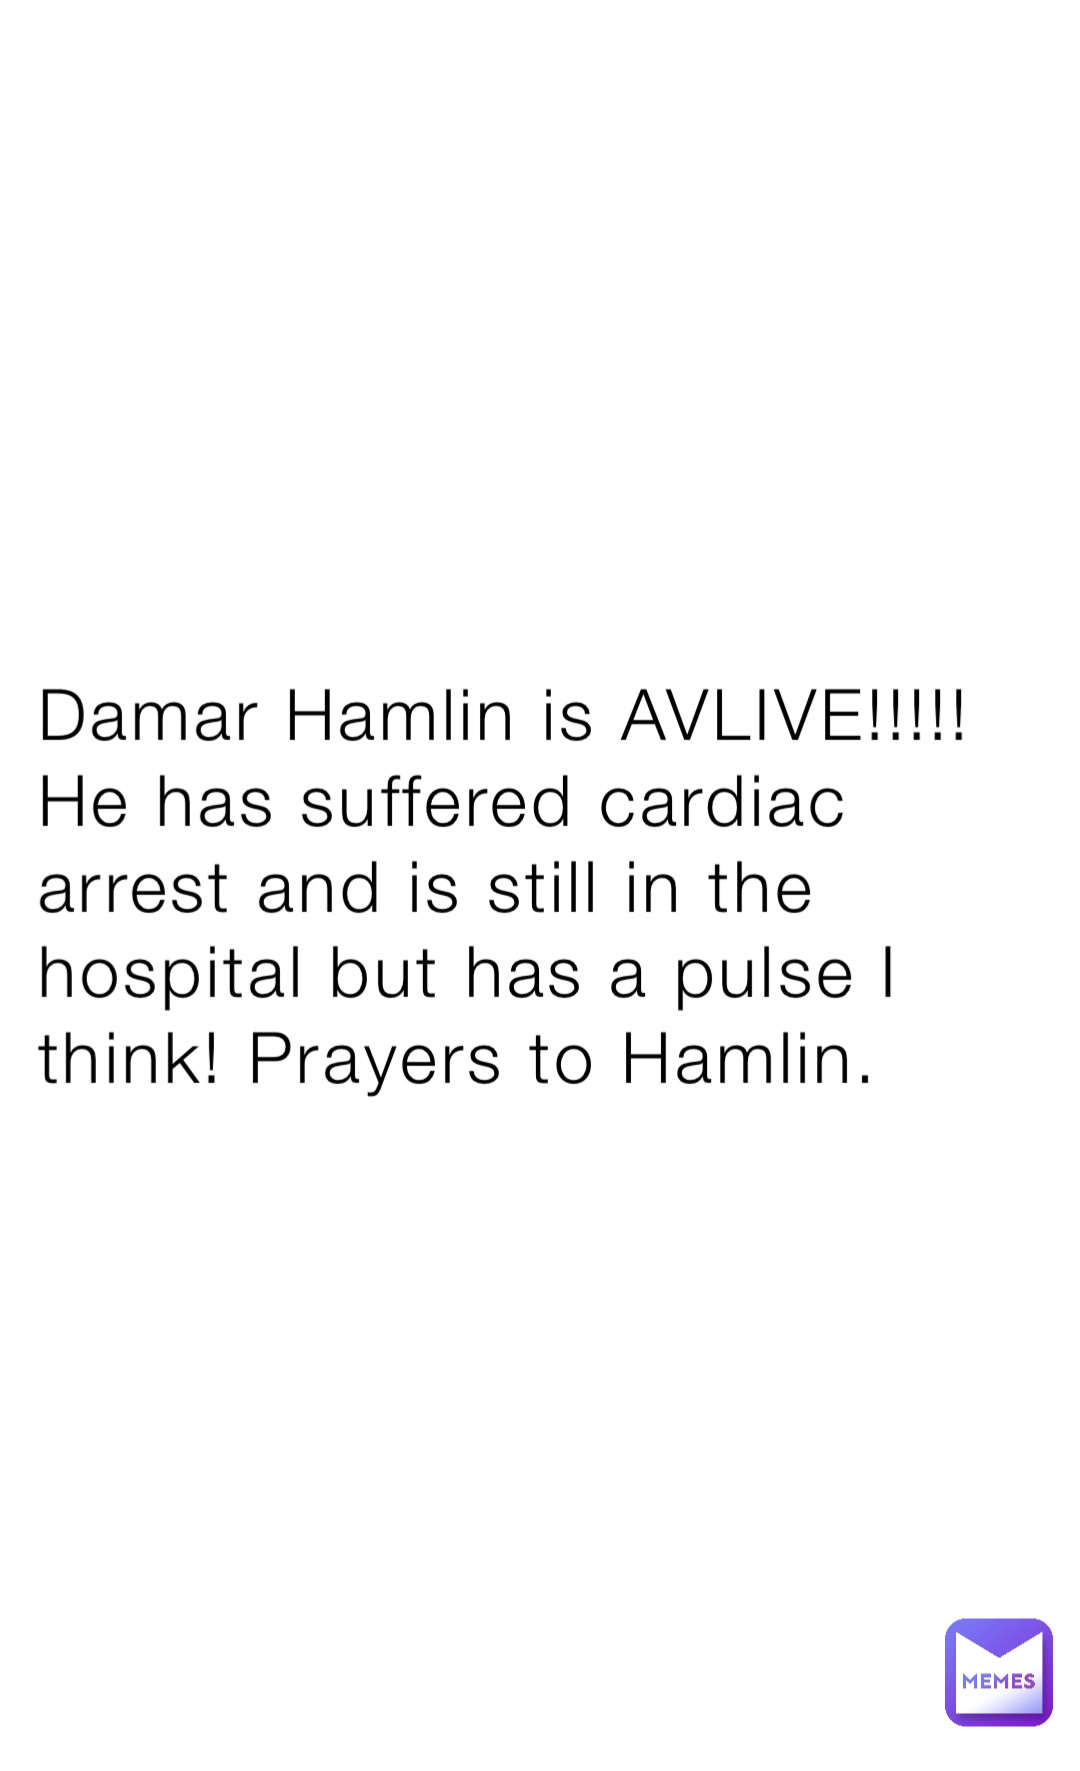 Damar Hamlin is AVLIVE!!!!! He has suffered cardiac arrest and is still in the hospital but has a pulse I think! Prayers to Hamlin.